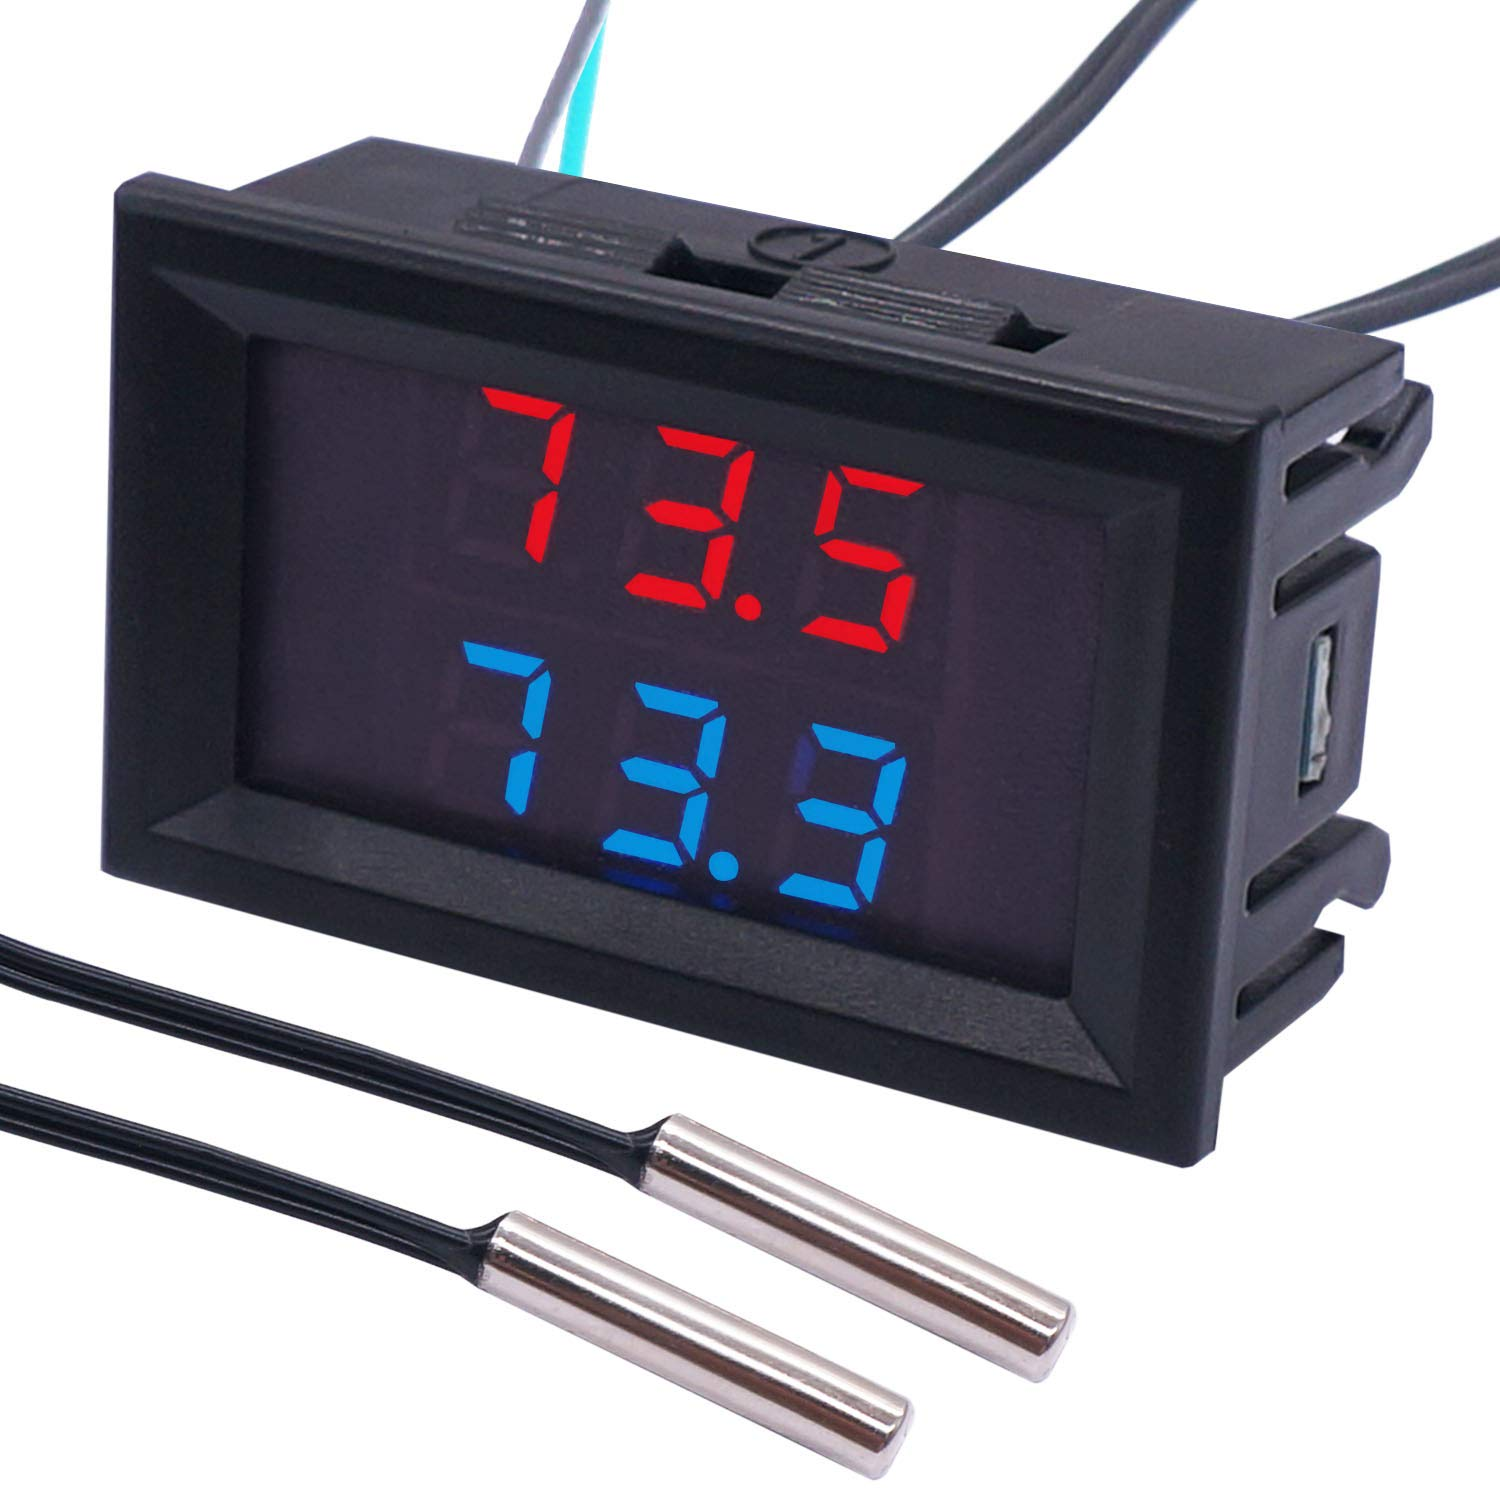 Digital thermometer display with temperature reading and battery indicator